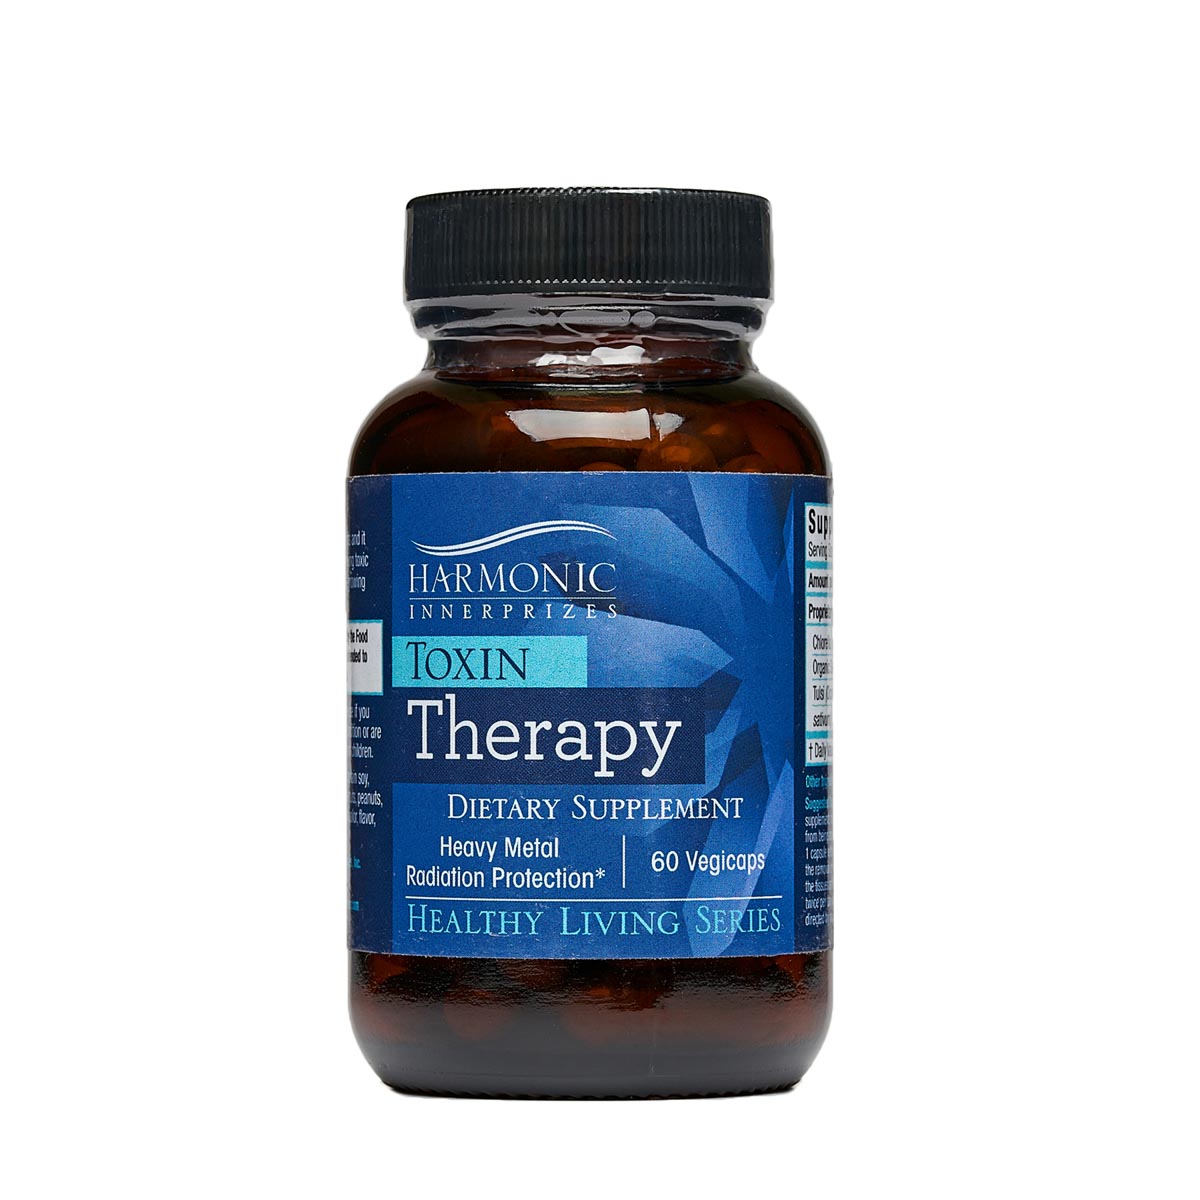 Toxin Therapy Capsules (60) | Harmonic Innerprizes | Raw Living UK | Supplements | Detox | Harmonic Innerprizes Toxin Therapy (60 Caps) contains the highest quality ingredients &amp; is formulated to support the body with heavy metal removal.